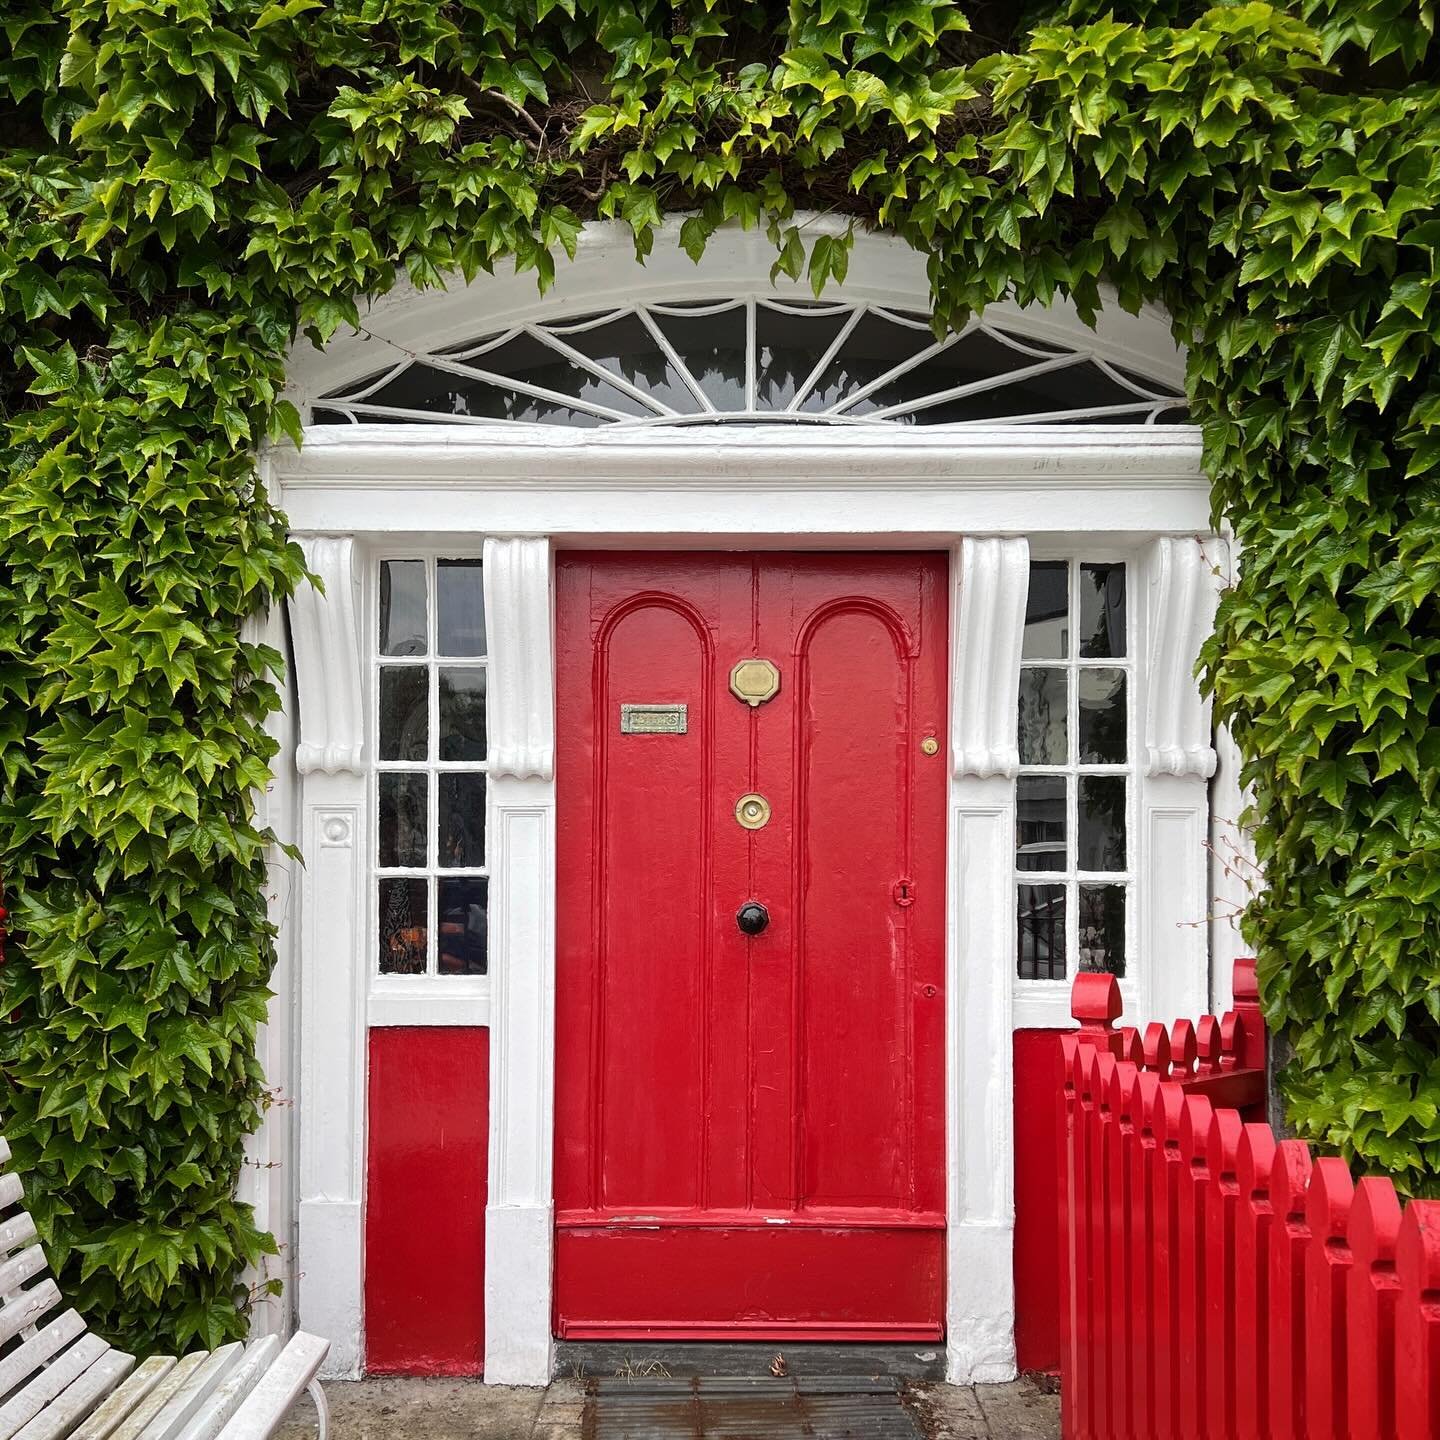 Red Yellow Blue! Doorways of Westport, one of the excursions on the Essence of Mulranny retreat. Love the brightly colored doors! #doorsoftheworld #essenceofmulranny